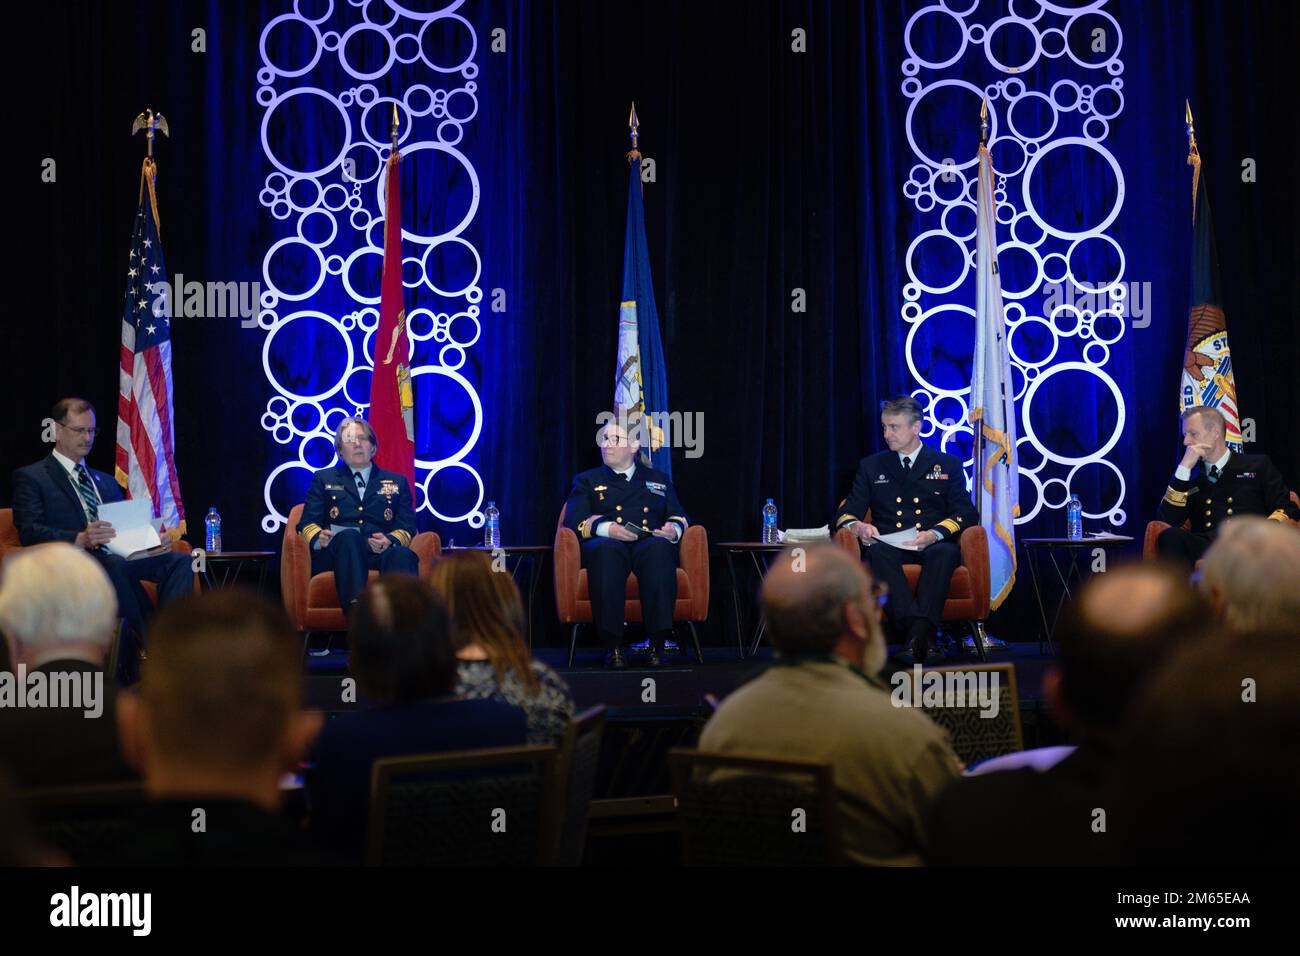 NATIONAL HARBOR, Md. (April 4, 2022) Ted Stevens, left, moderates the Geostrategic Importance of the Arctice event for speakers Adm. Linda Fagan, Vice Commandant, U.S. Coast Guard, left center, Rear Adm. Ewa Skoog Haslum, Chief of Navy, Swedish Navy, center, Mr. Chris Henderson, Deputy Commissioner, Canadian Coast Guard, right center, and Rear Adm. Marin la Cour-Andersen, Commander, Joint Arctic Command during the Sea-Air-Space 2022 Exposition. The Sea-Air-Space Exposition is an annual event that brings together key military decision makers, the U.S. defense industrial base and private-sector Stock Photo